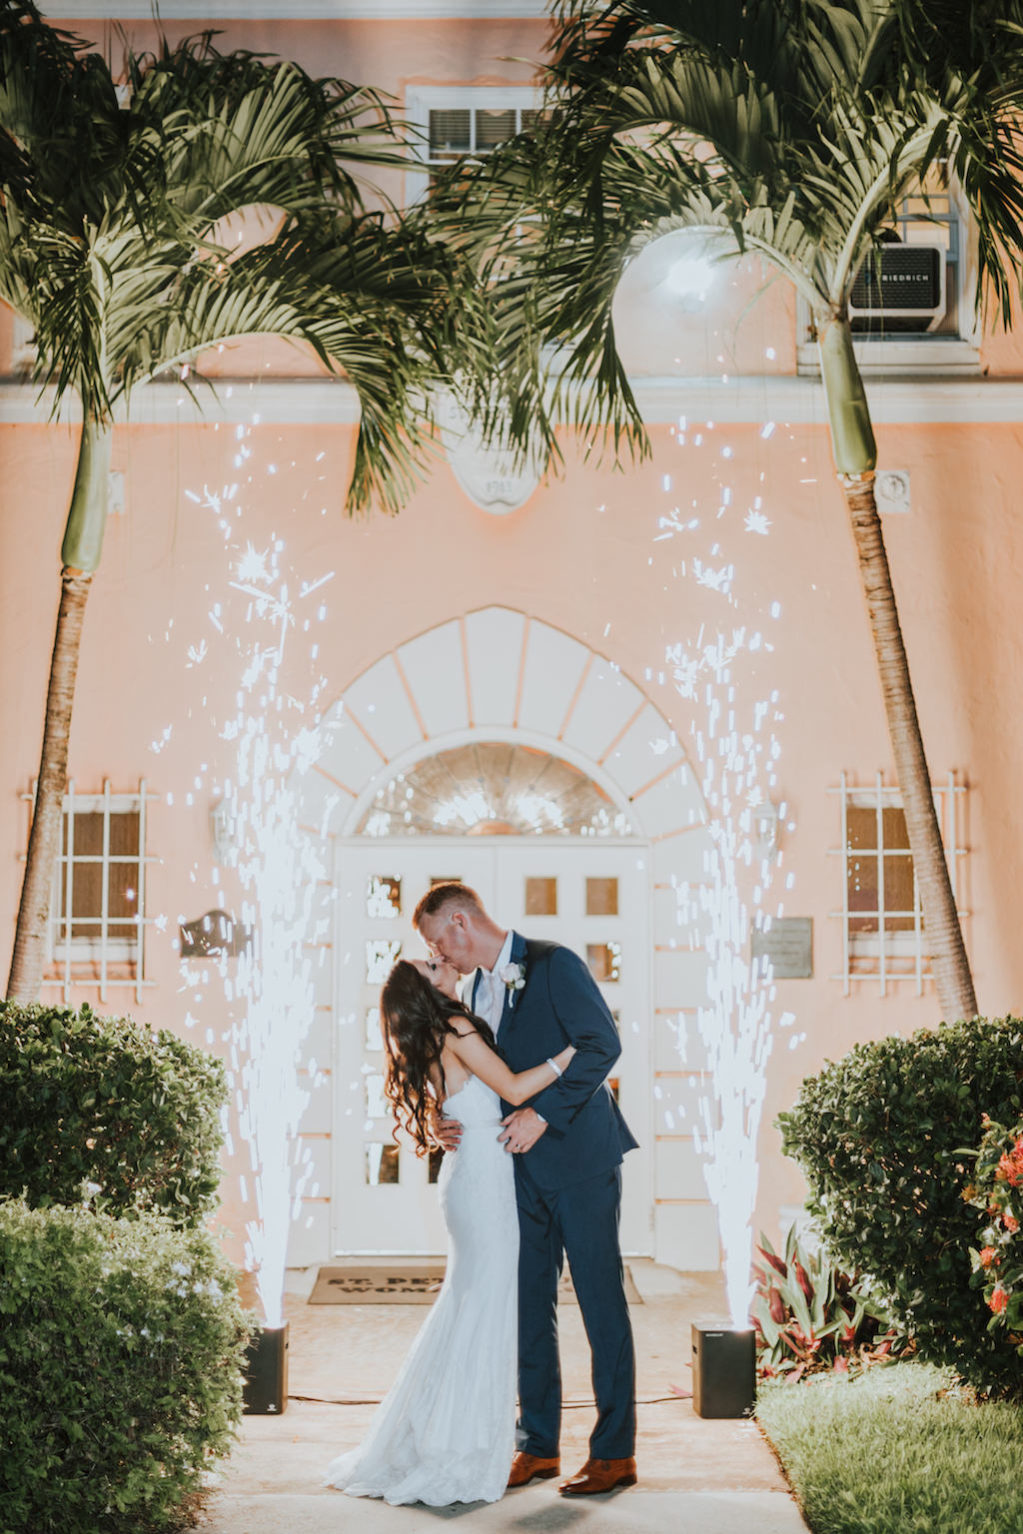 Nighttime Wedding Sparkler Fountain Exit Bride and Groom Portrait | Tampa Bay DJ and Lighting by Nature Coast Entertainment Services | St Pete Wedding Reception Venue St Petersburg Woman's Club